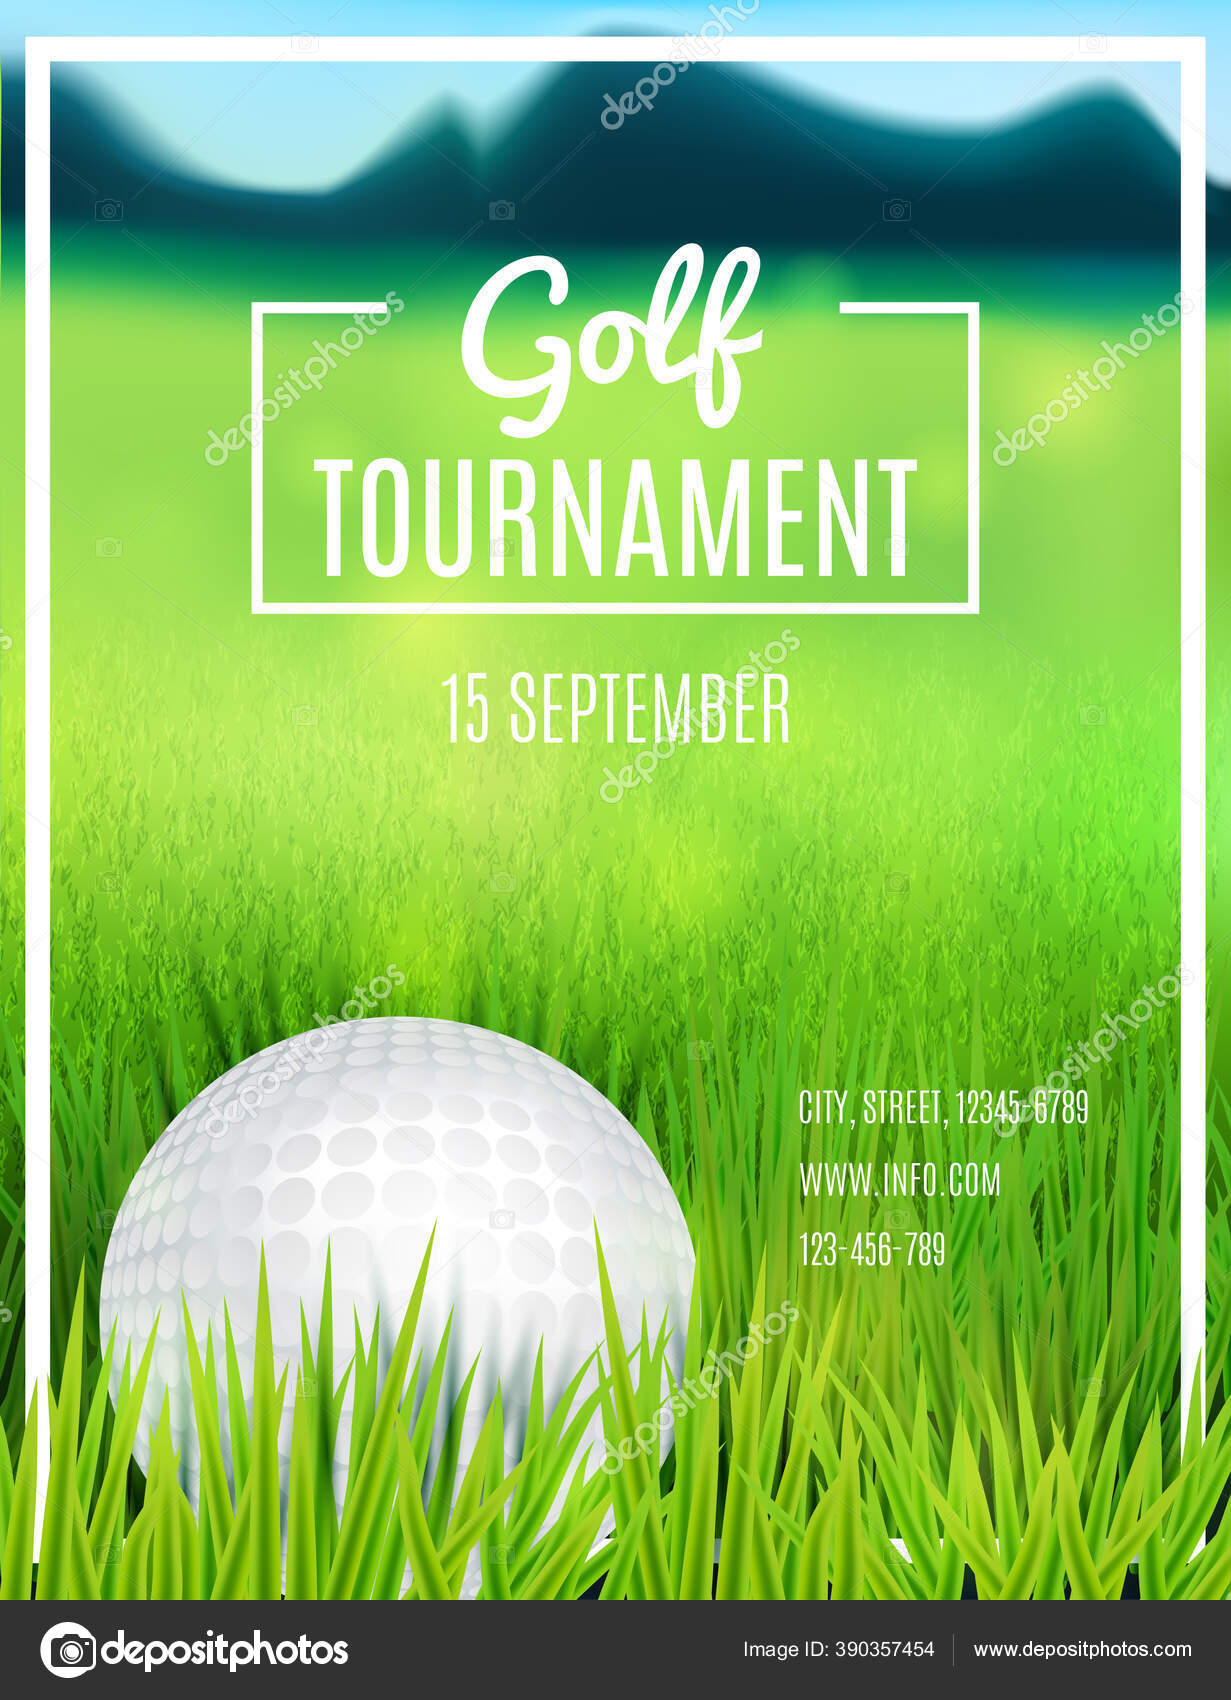 Golf Tournament Poster Template and Ideas for Design